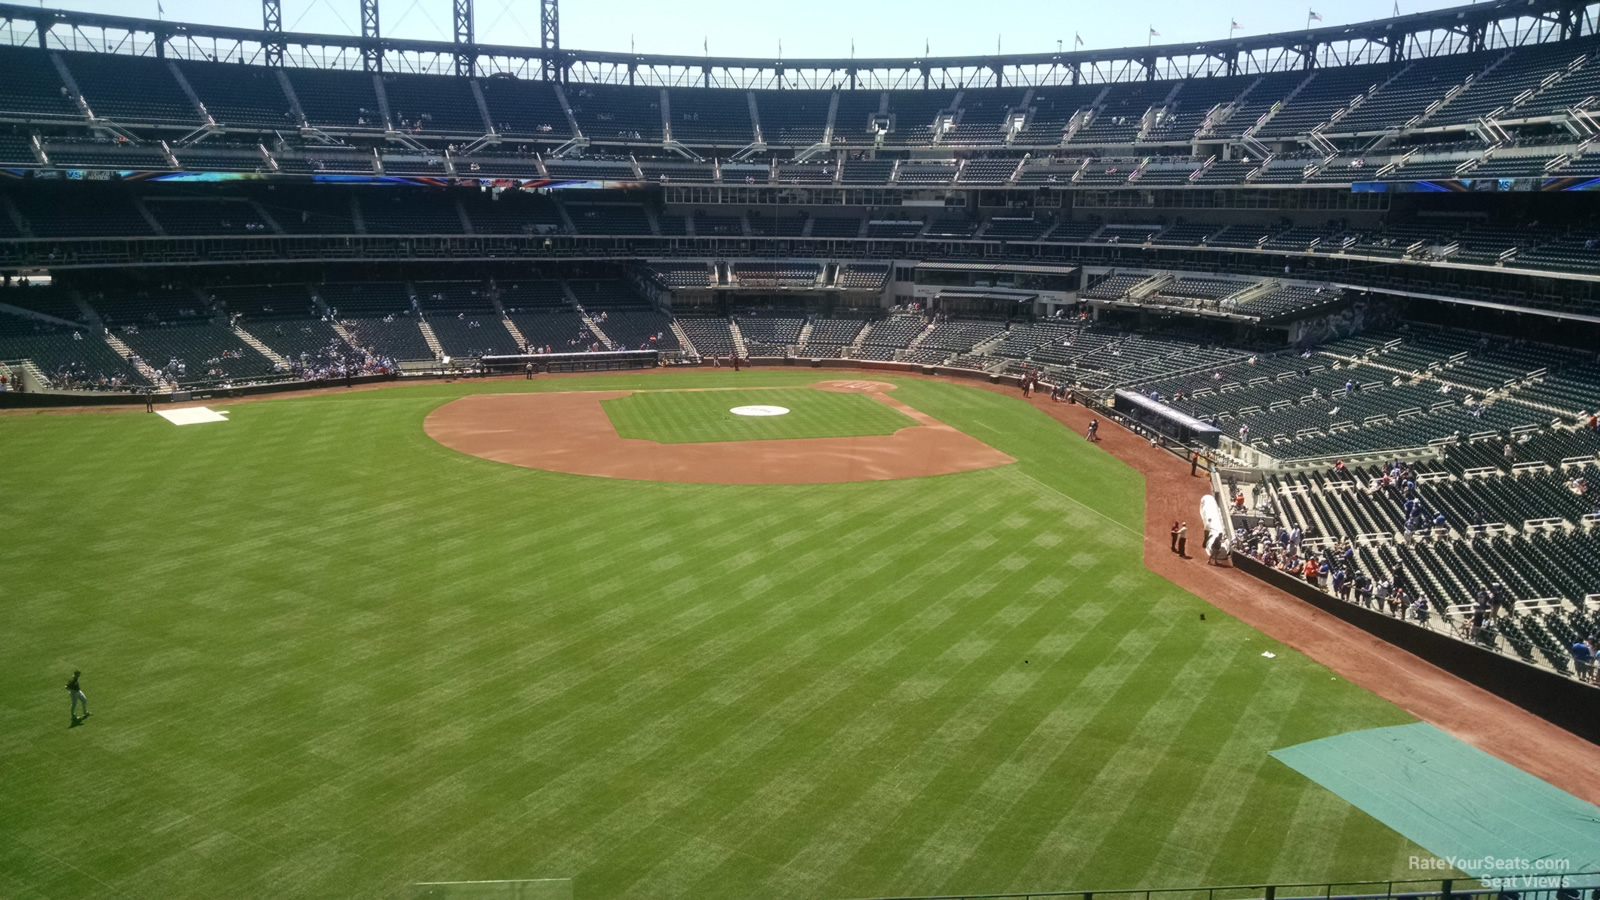 section 335, row 11 seat view  - citi field